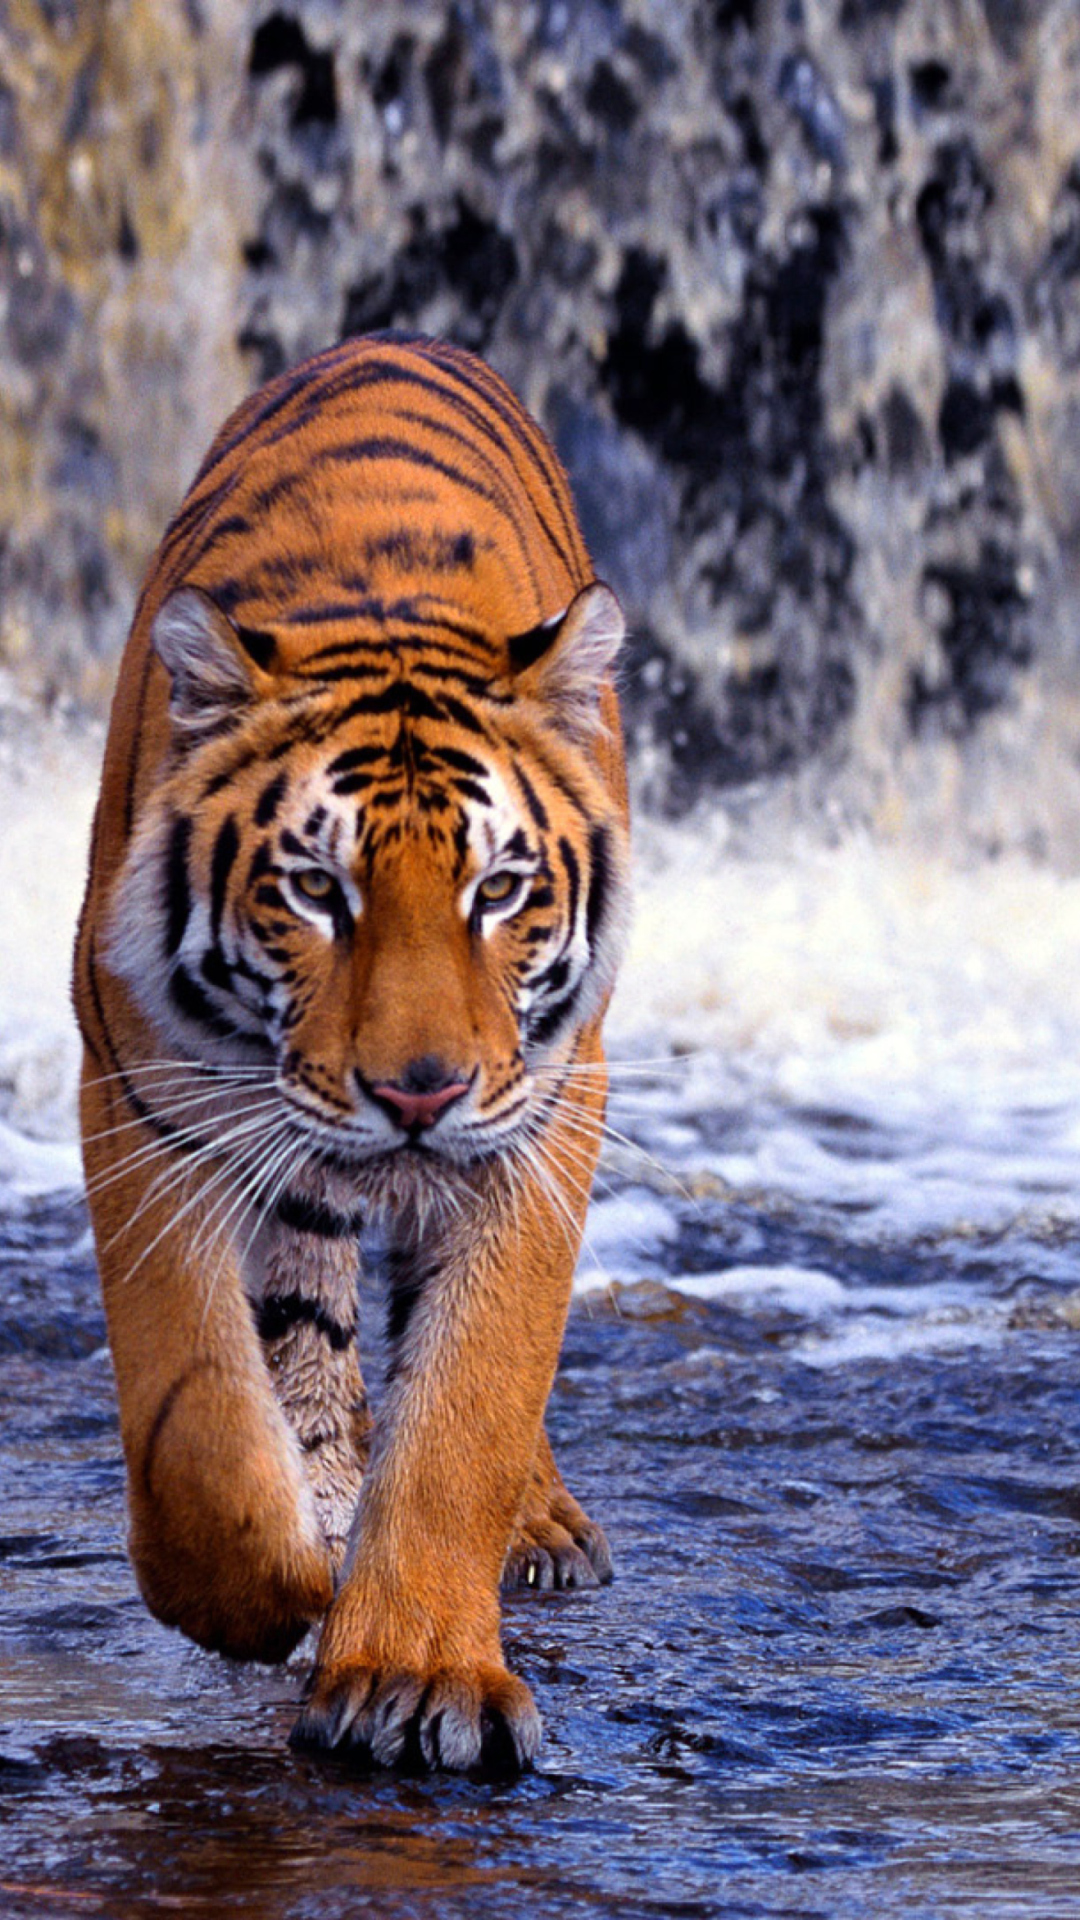 Das Tiger In Front Of Waterfall Wallpaper 1080x1920